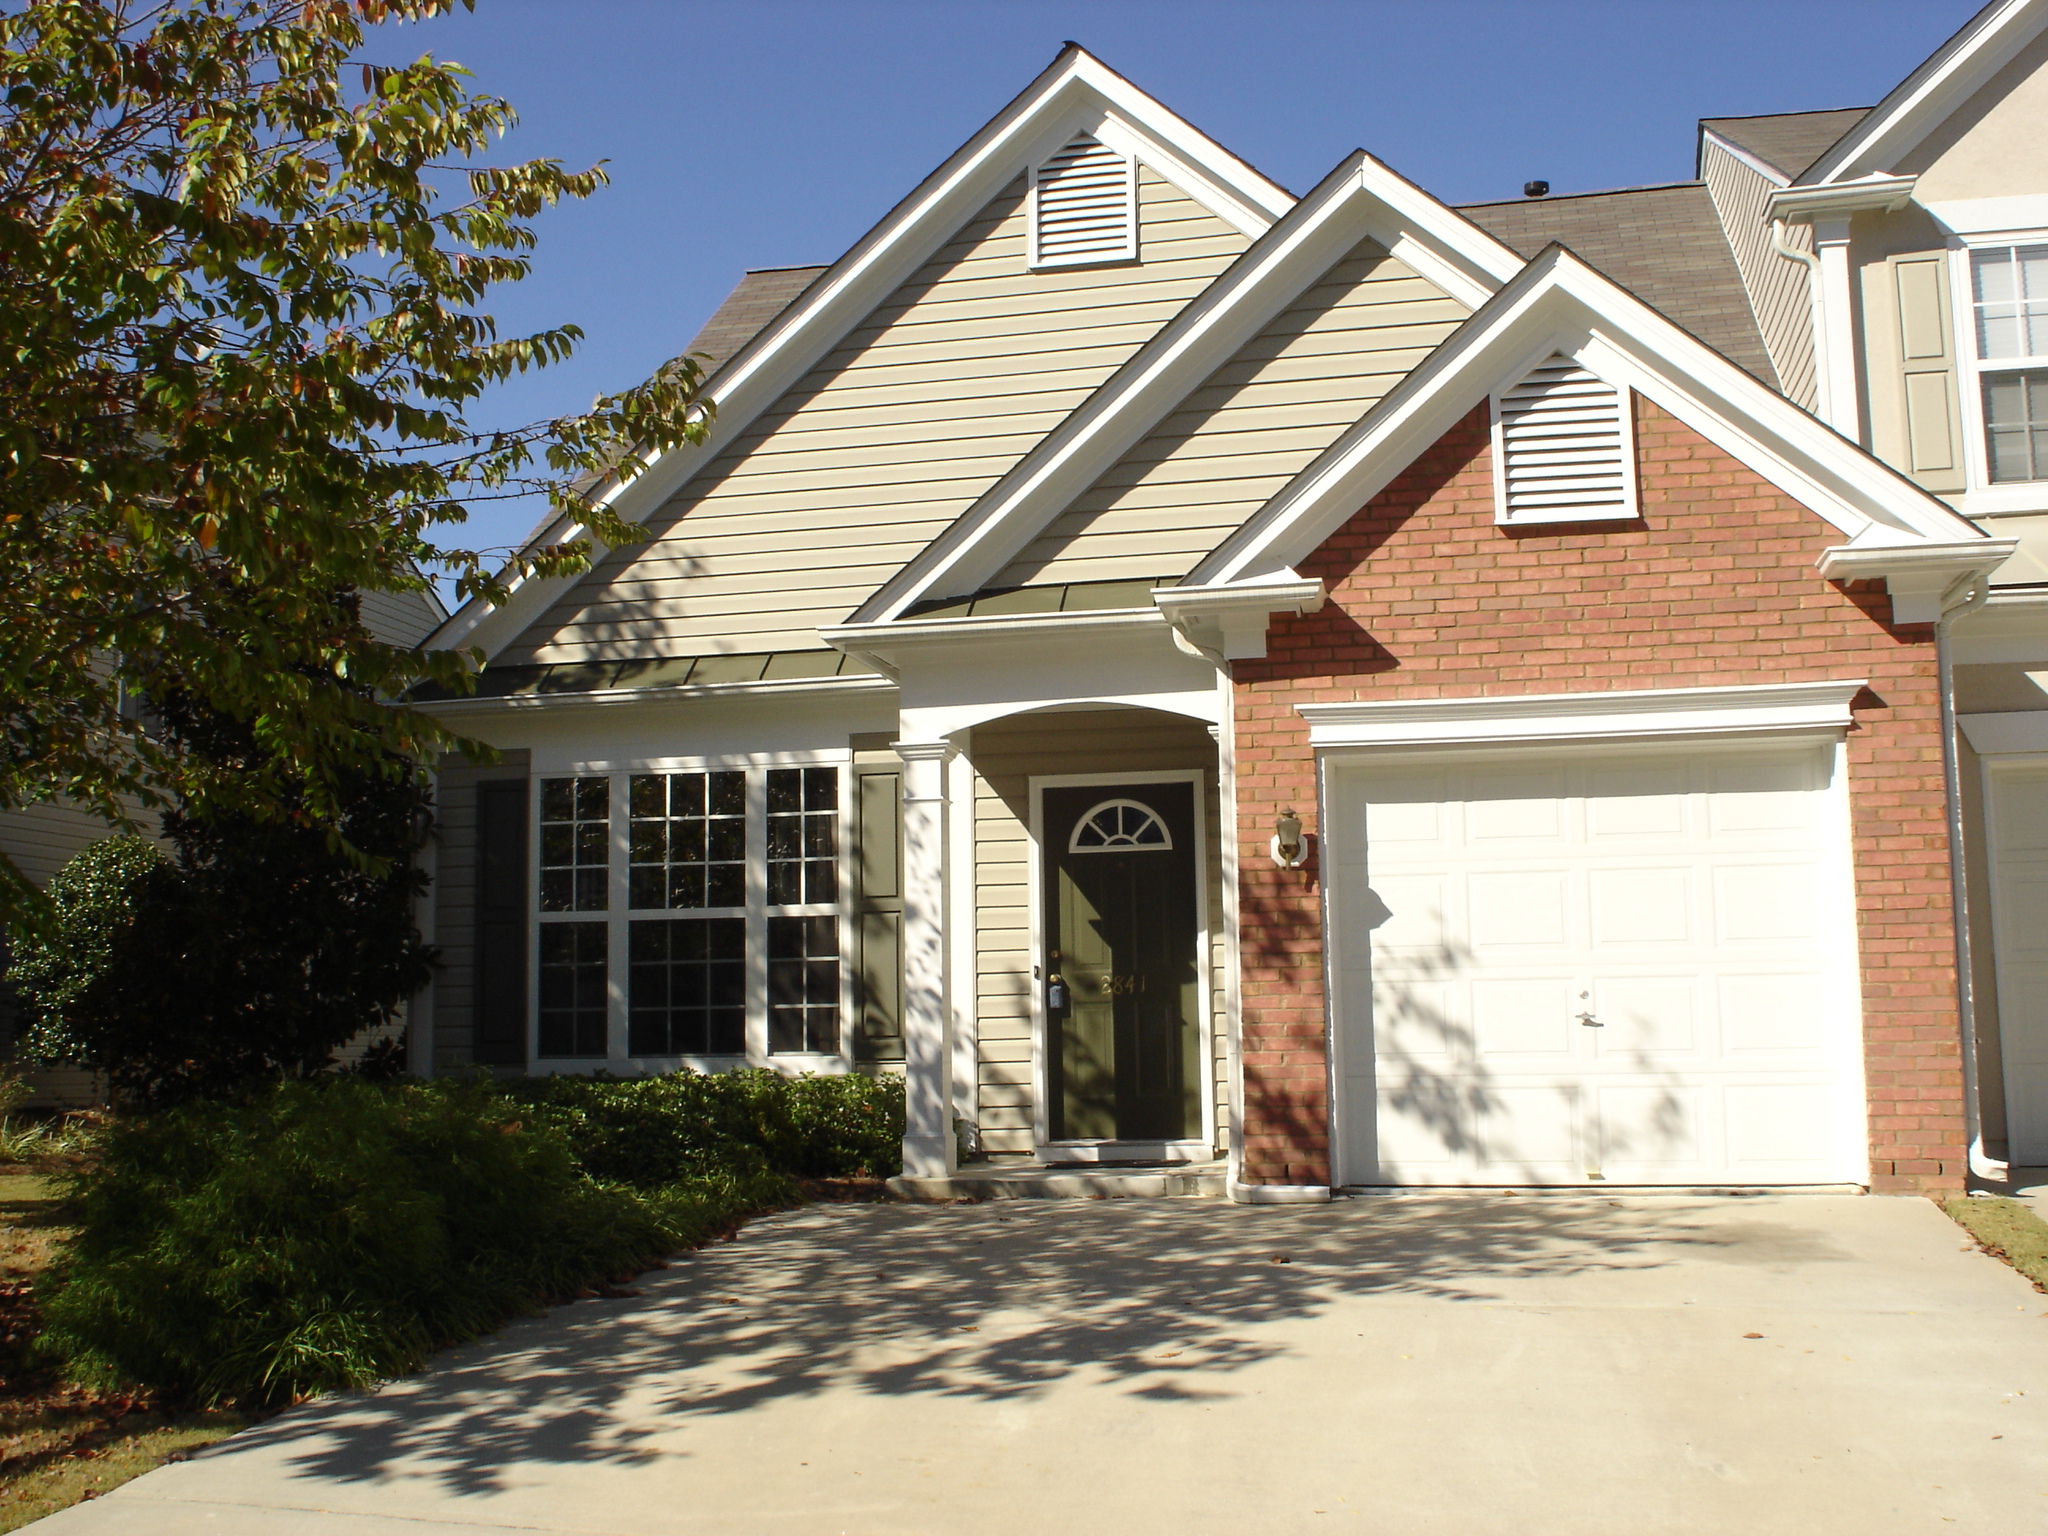 2841 Ashleigh Ln, 3BR/2.5BA Townhome for Lease in Alpharetta for $2700/month Rent